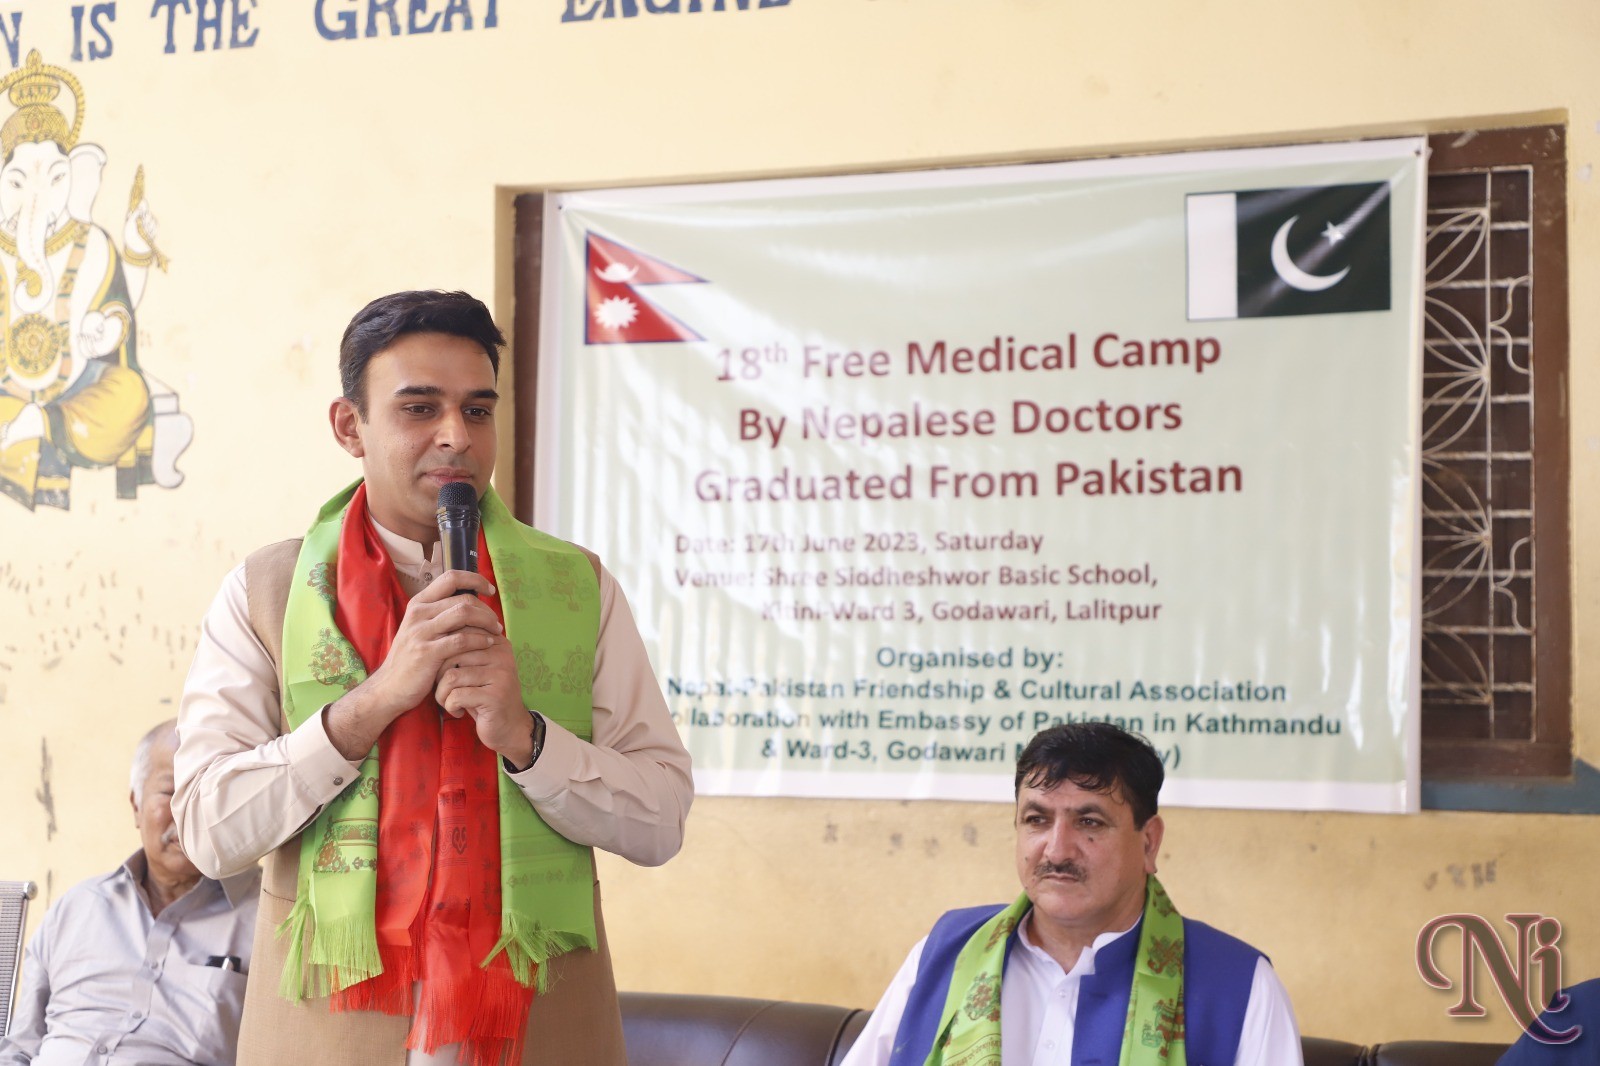 Pakistan’s support to Nepal with free medical camps to continue